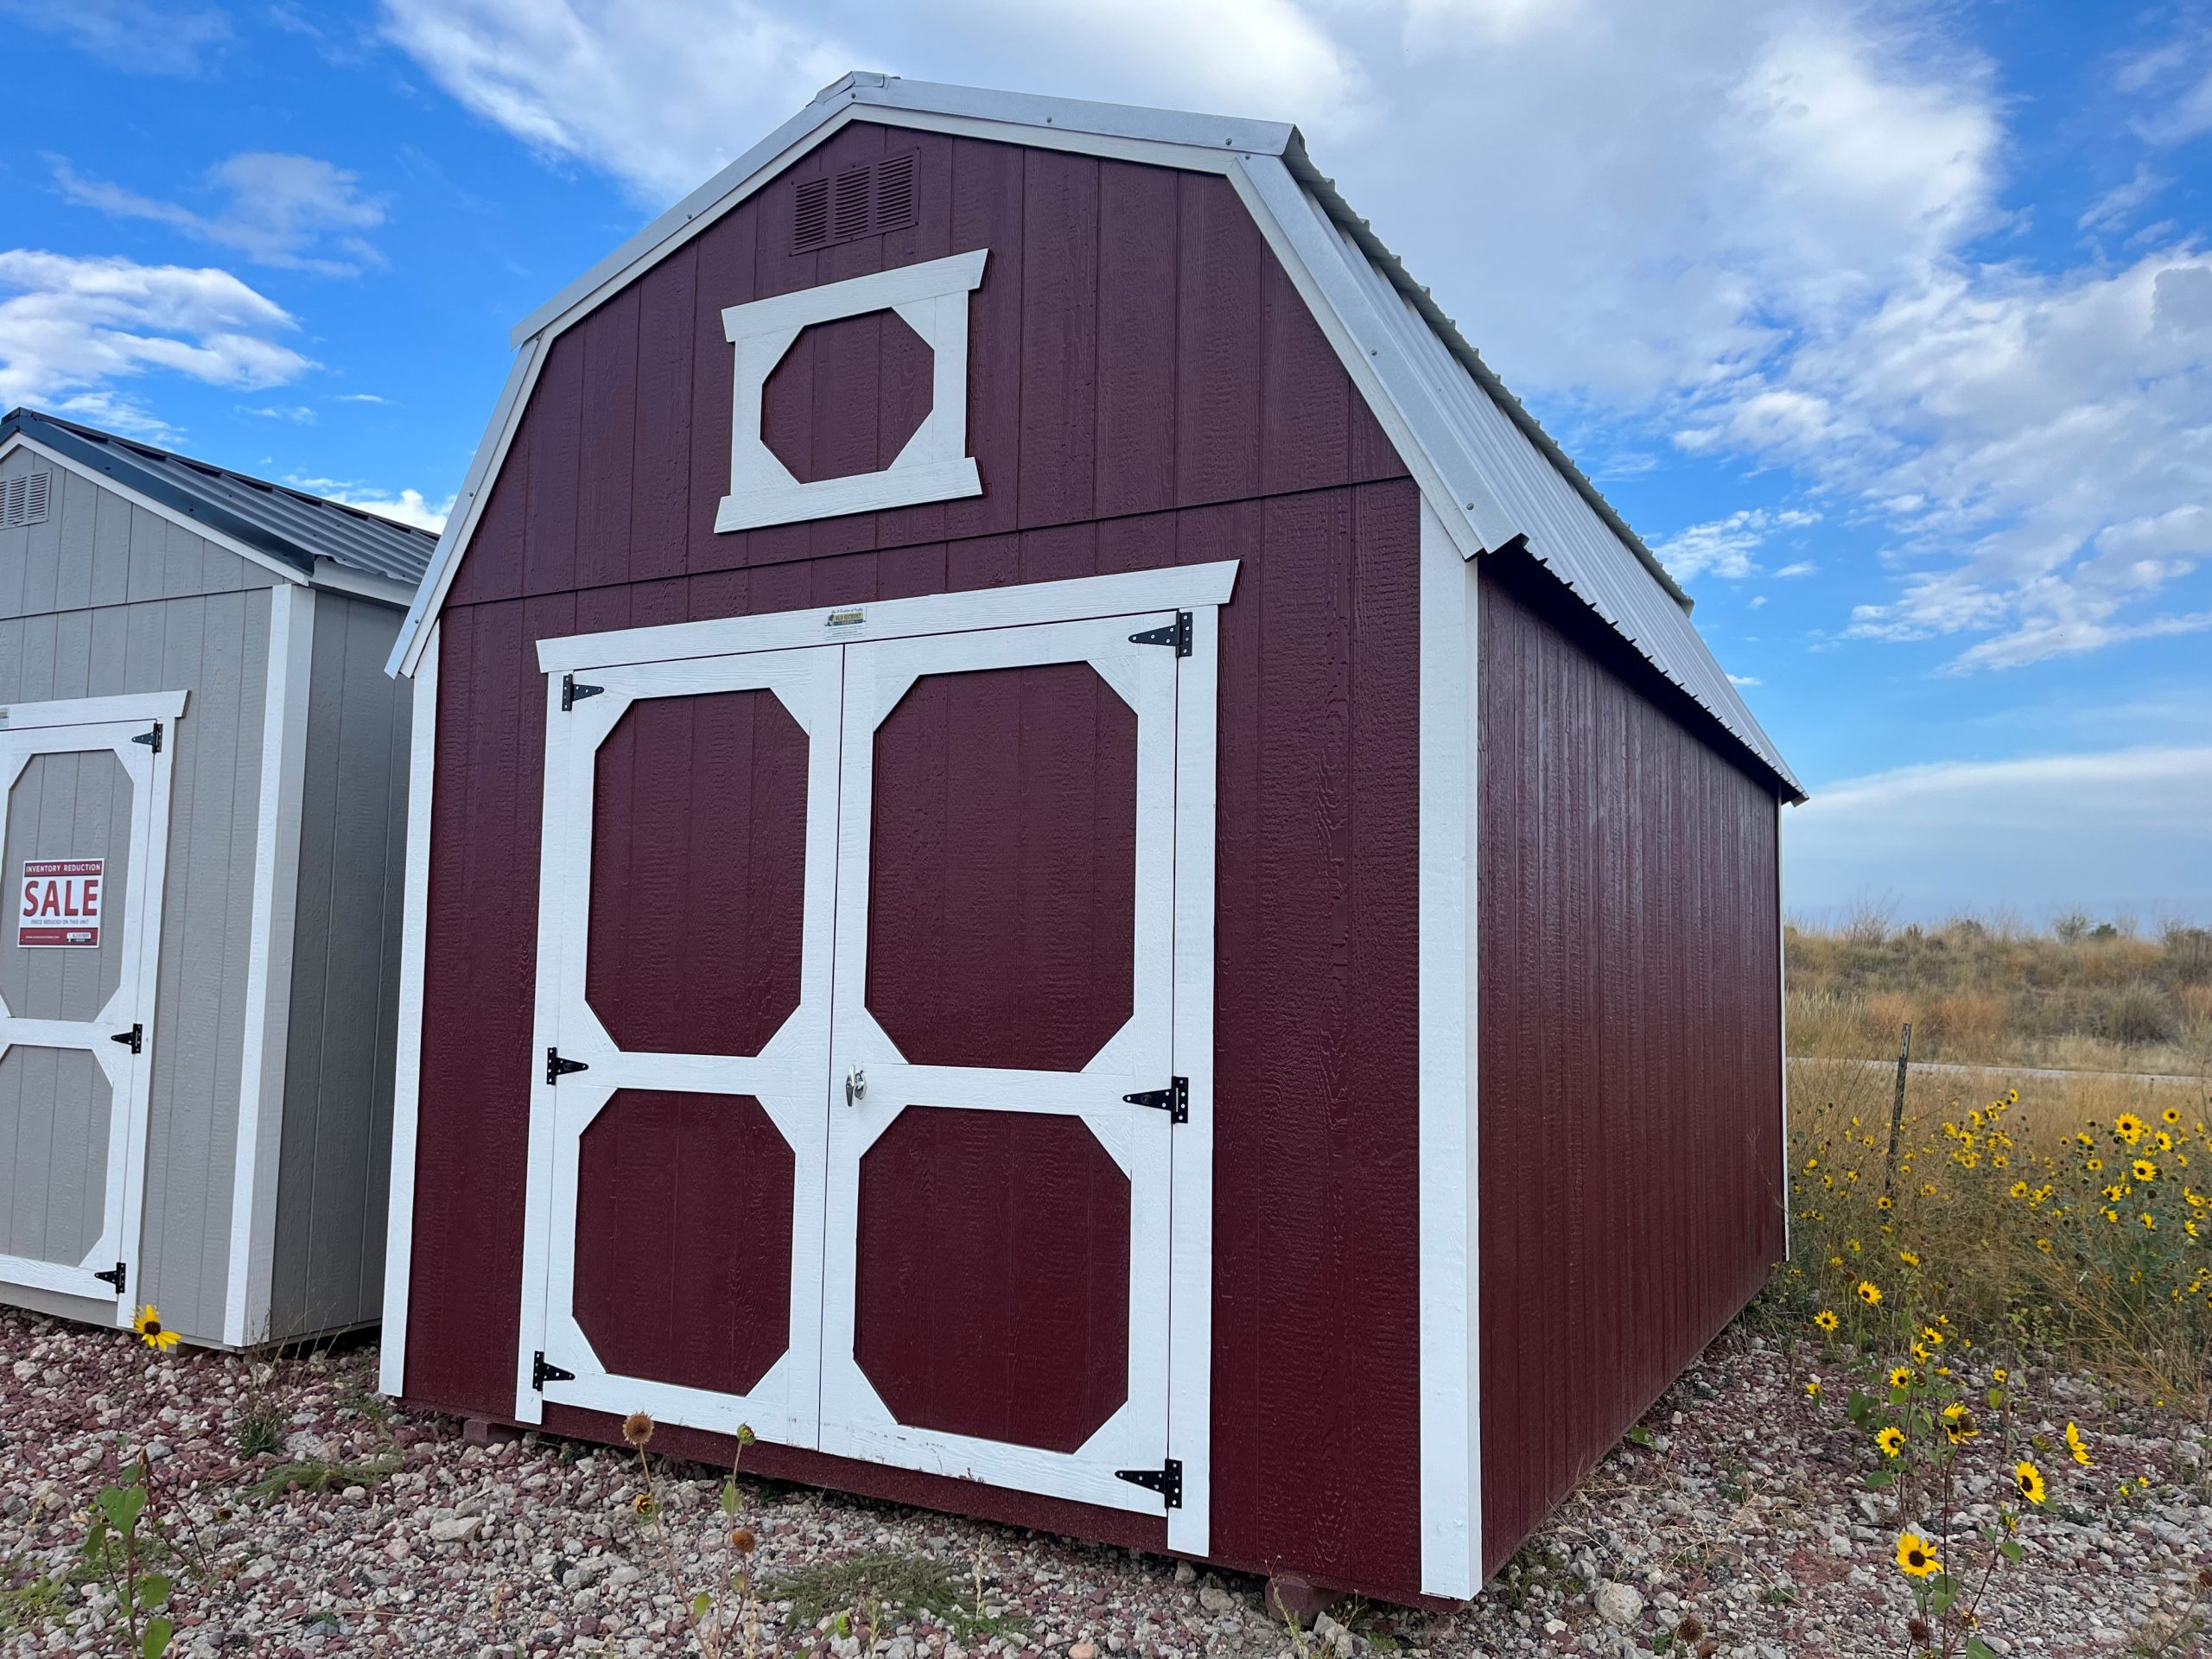 10×16 Lofted Barn Shed For Sale Barn Red Barn White Trim